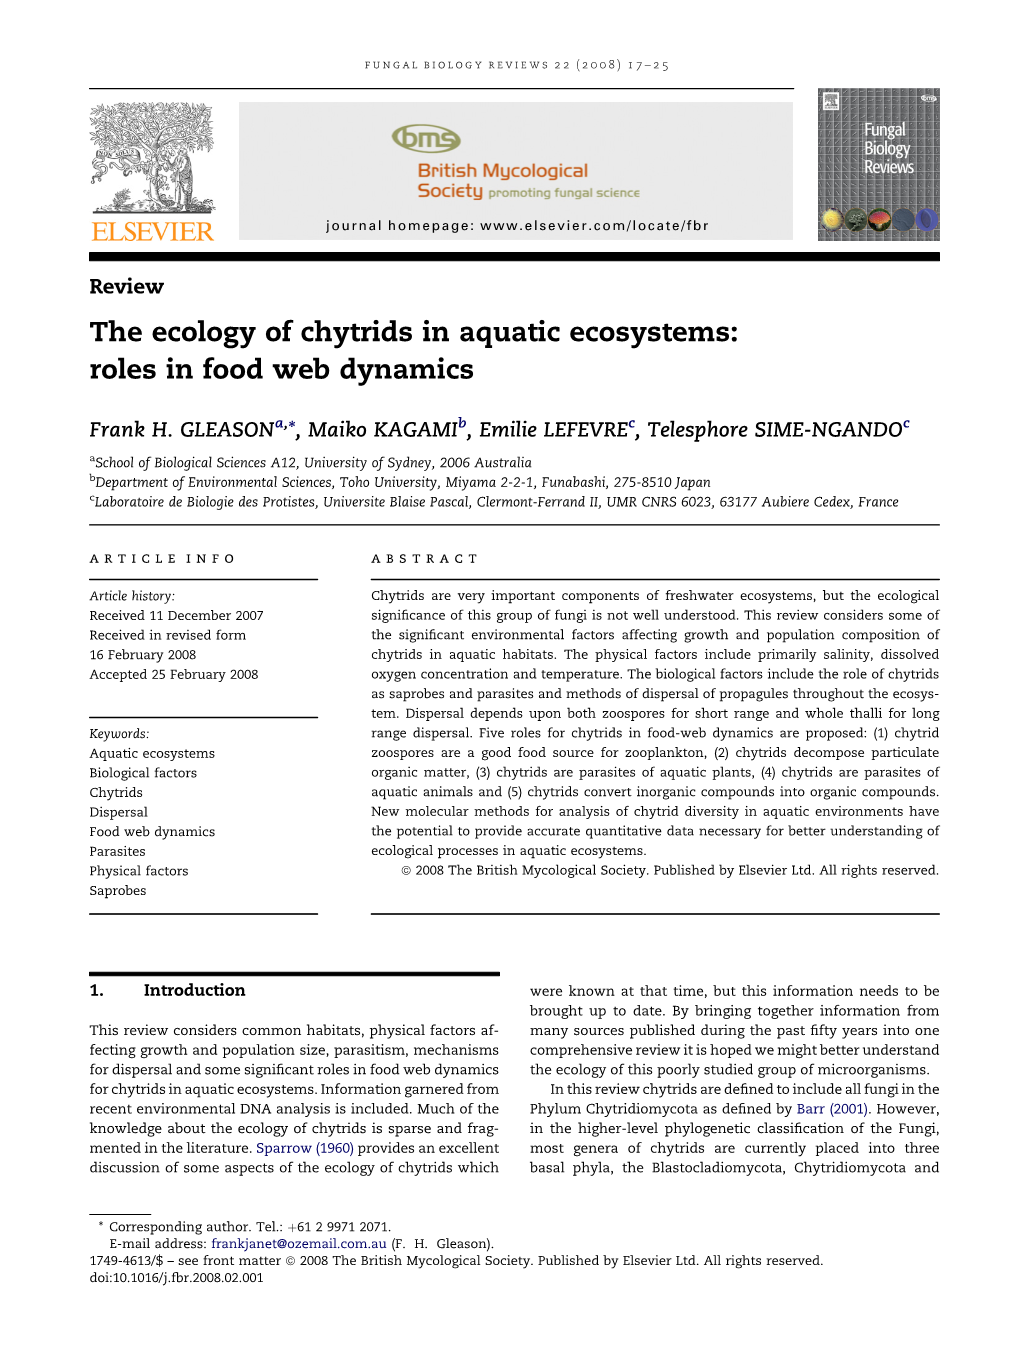 The Ecology of Chytrids in Aquatic Ecosystems: Roles in Food Web Dynamics